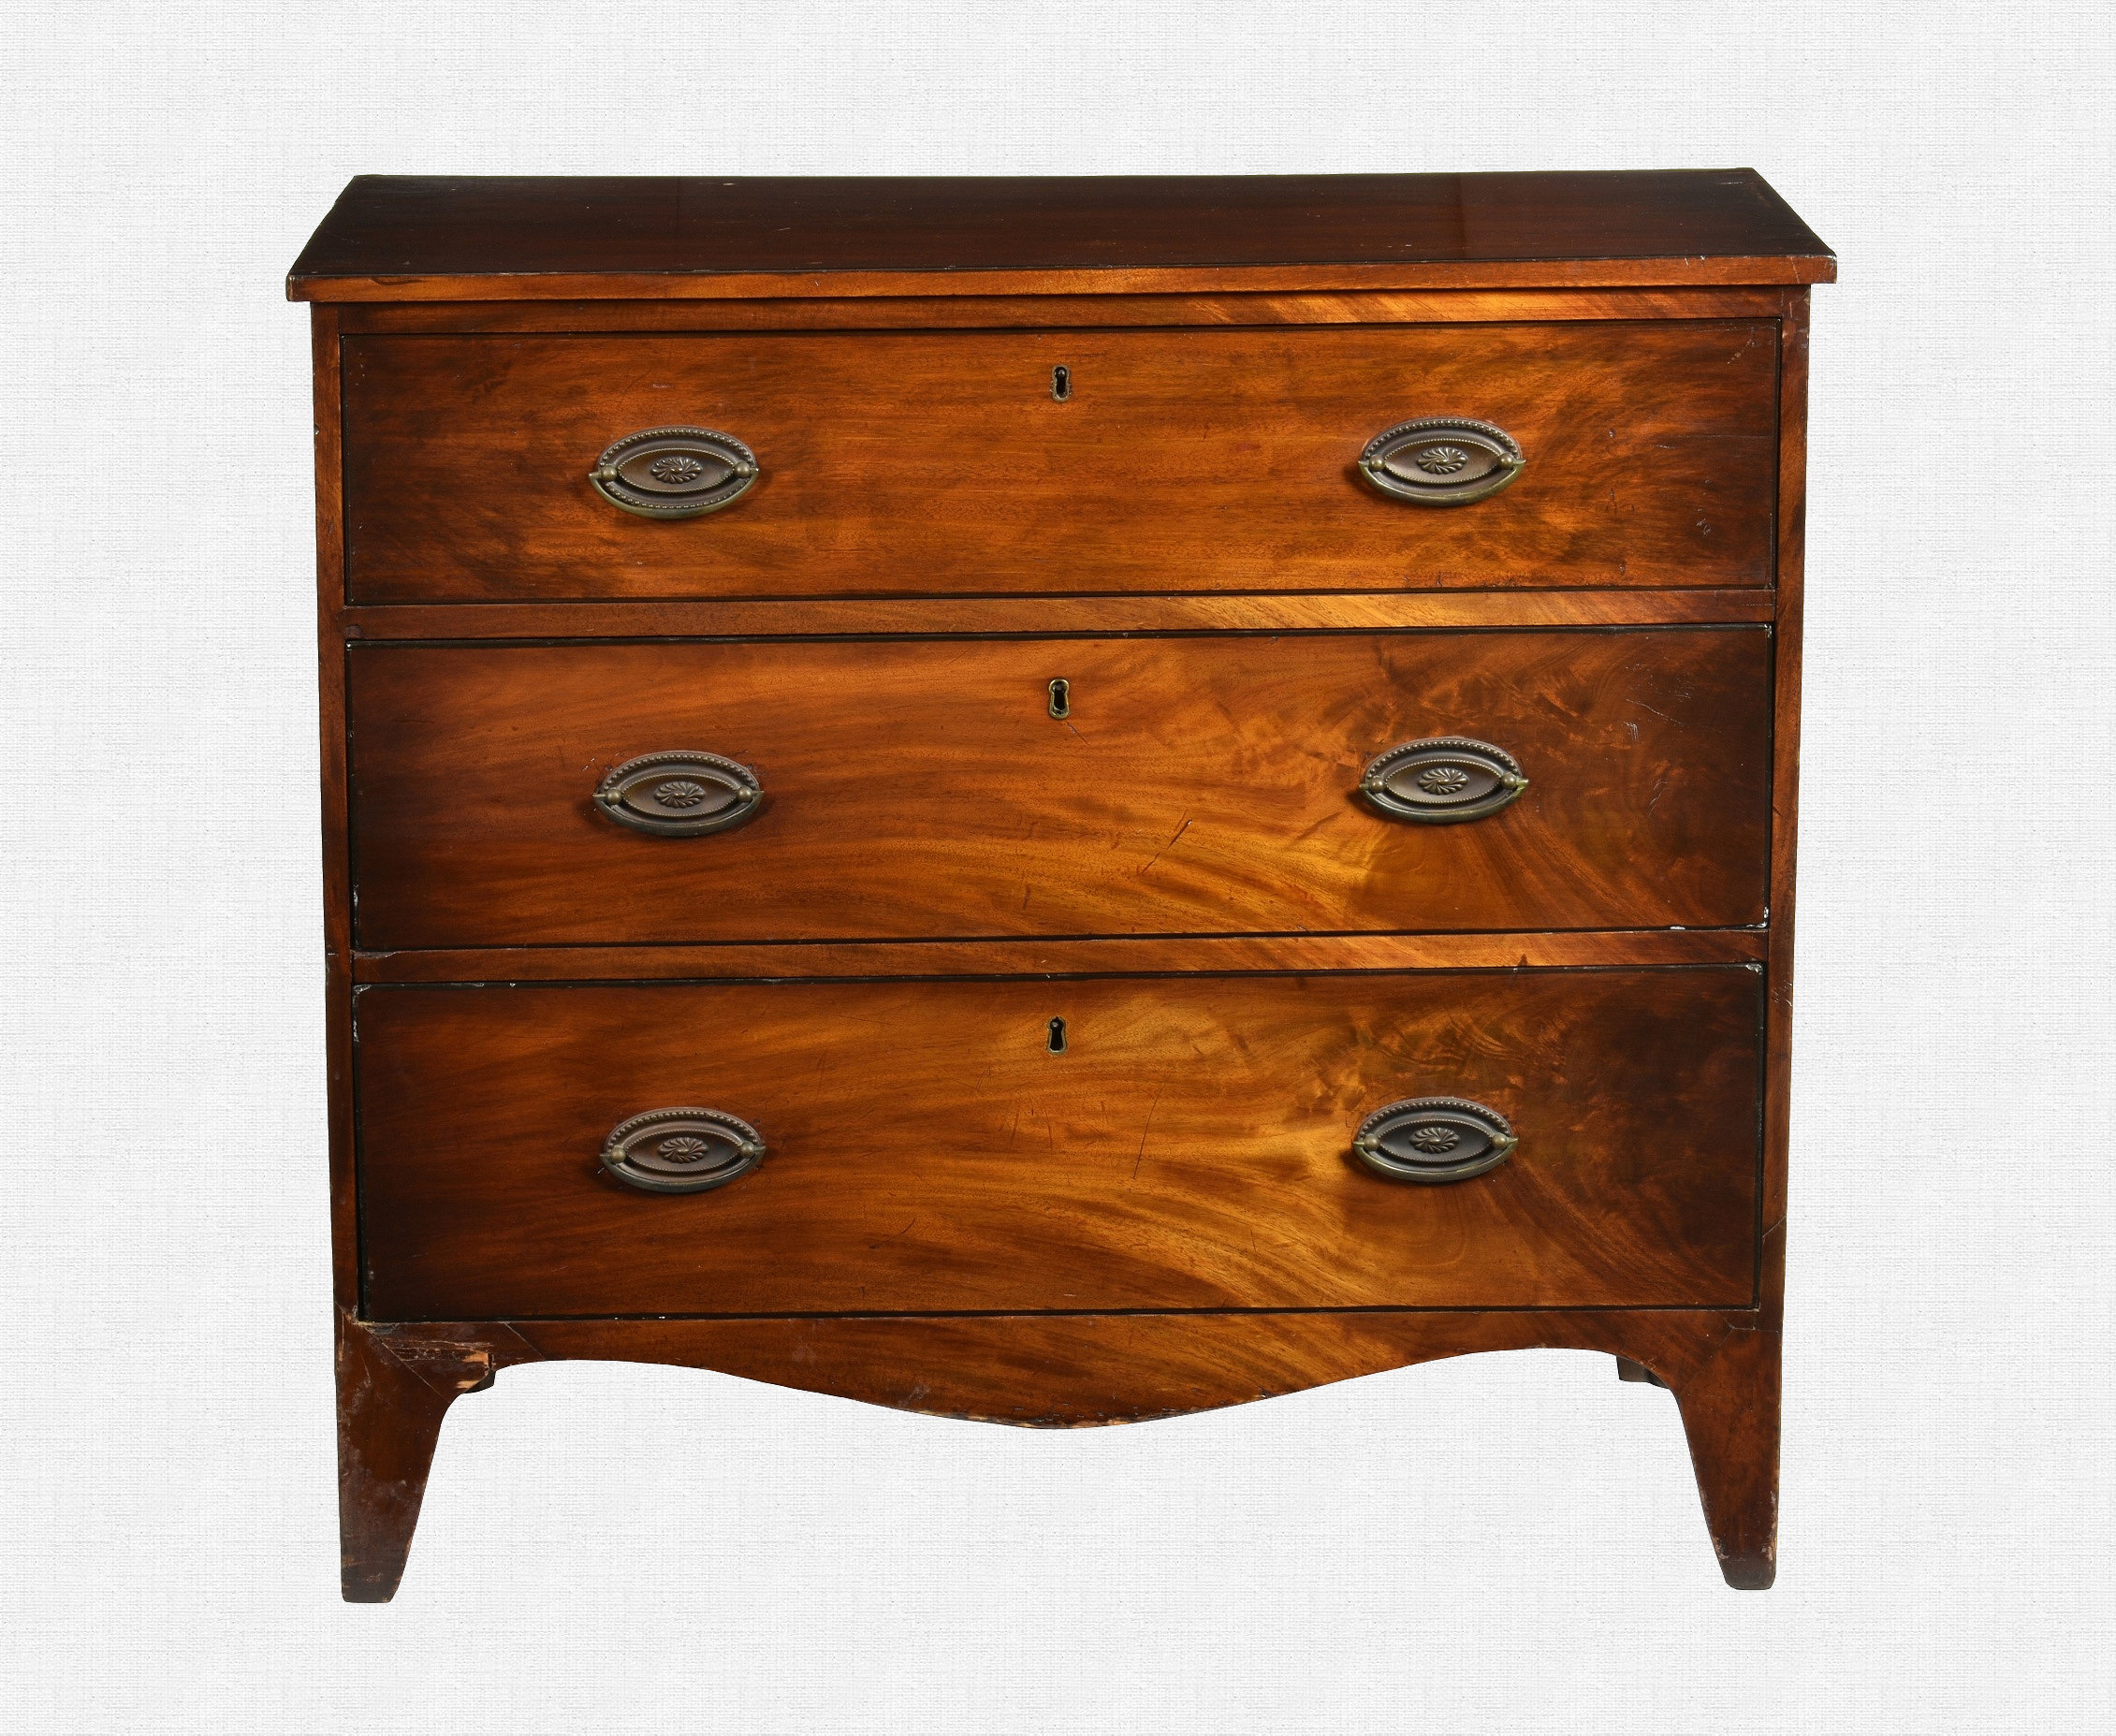 A George IV mahogany and ebony strung chest of three drawers of small proportions, the rectangular